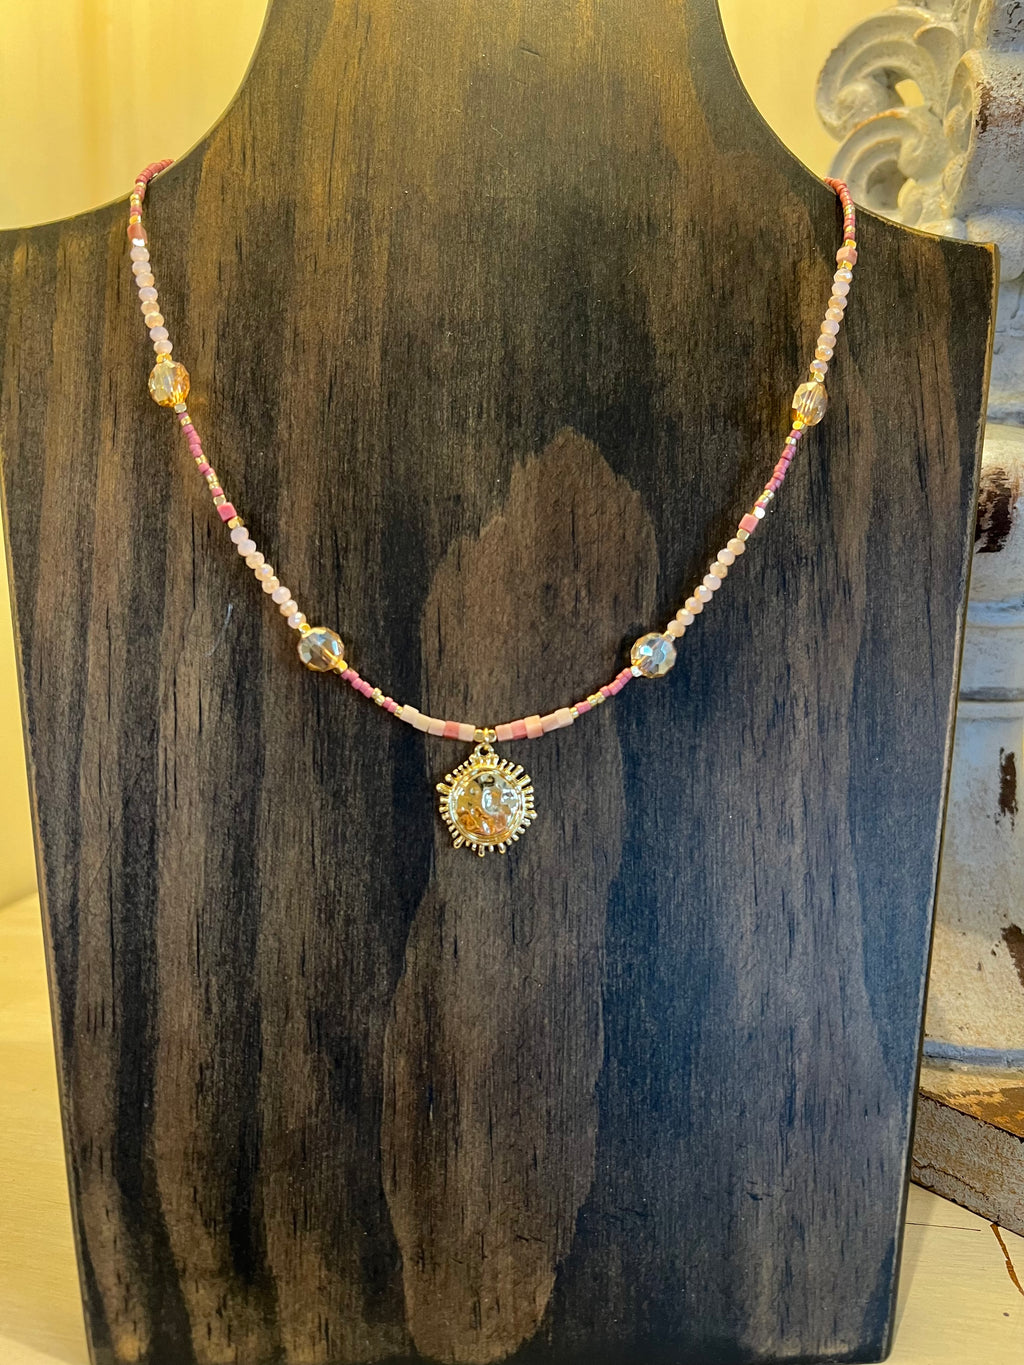 Beaded Necklace Featuring Glass Crystal Bead Stations & Metal Tone Sun Pendant